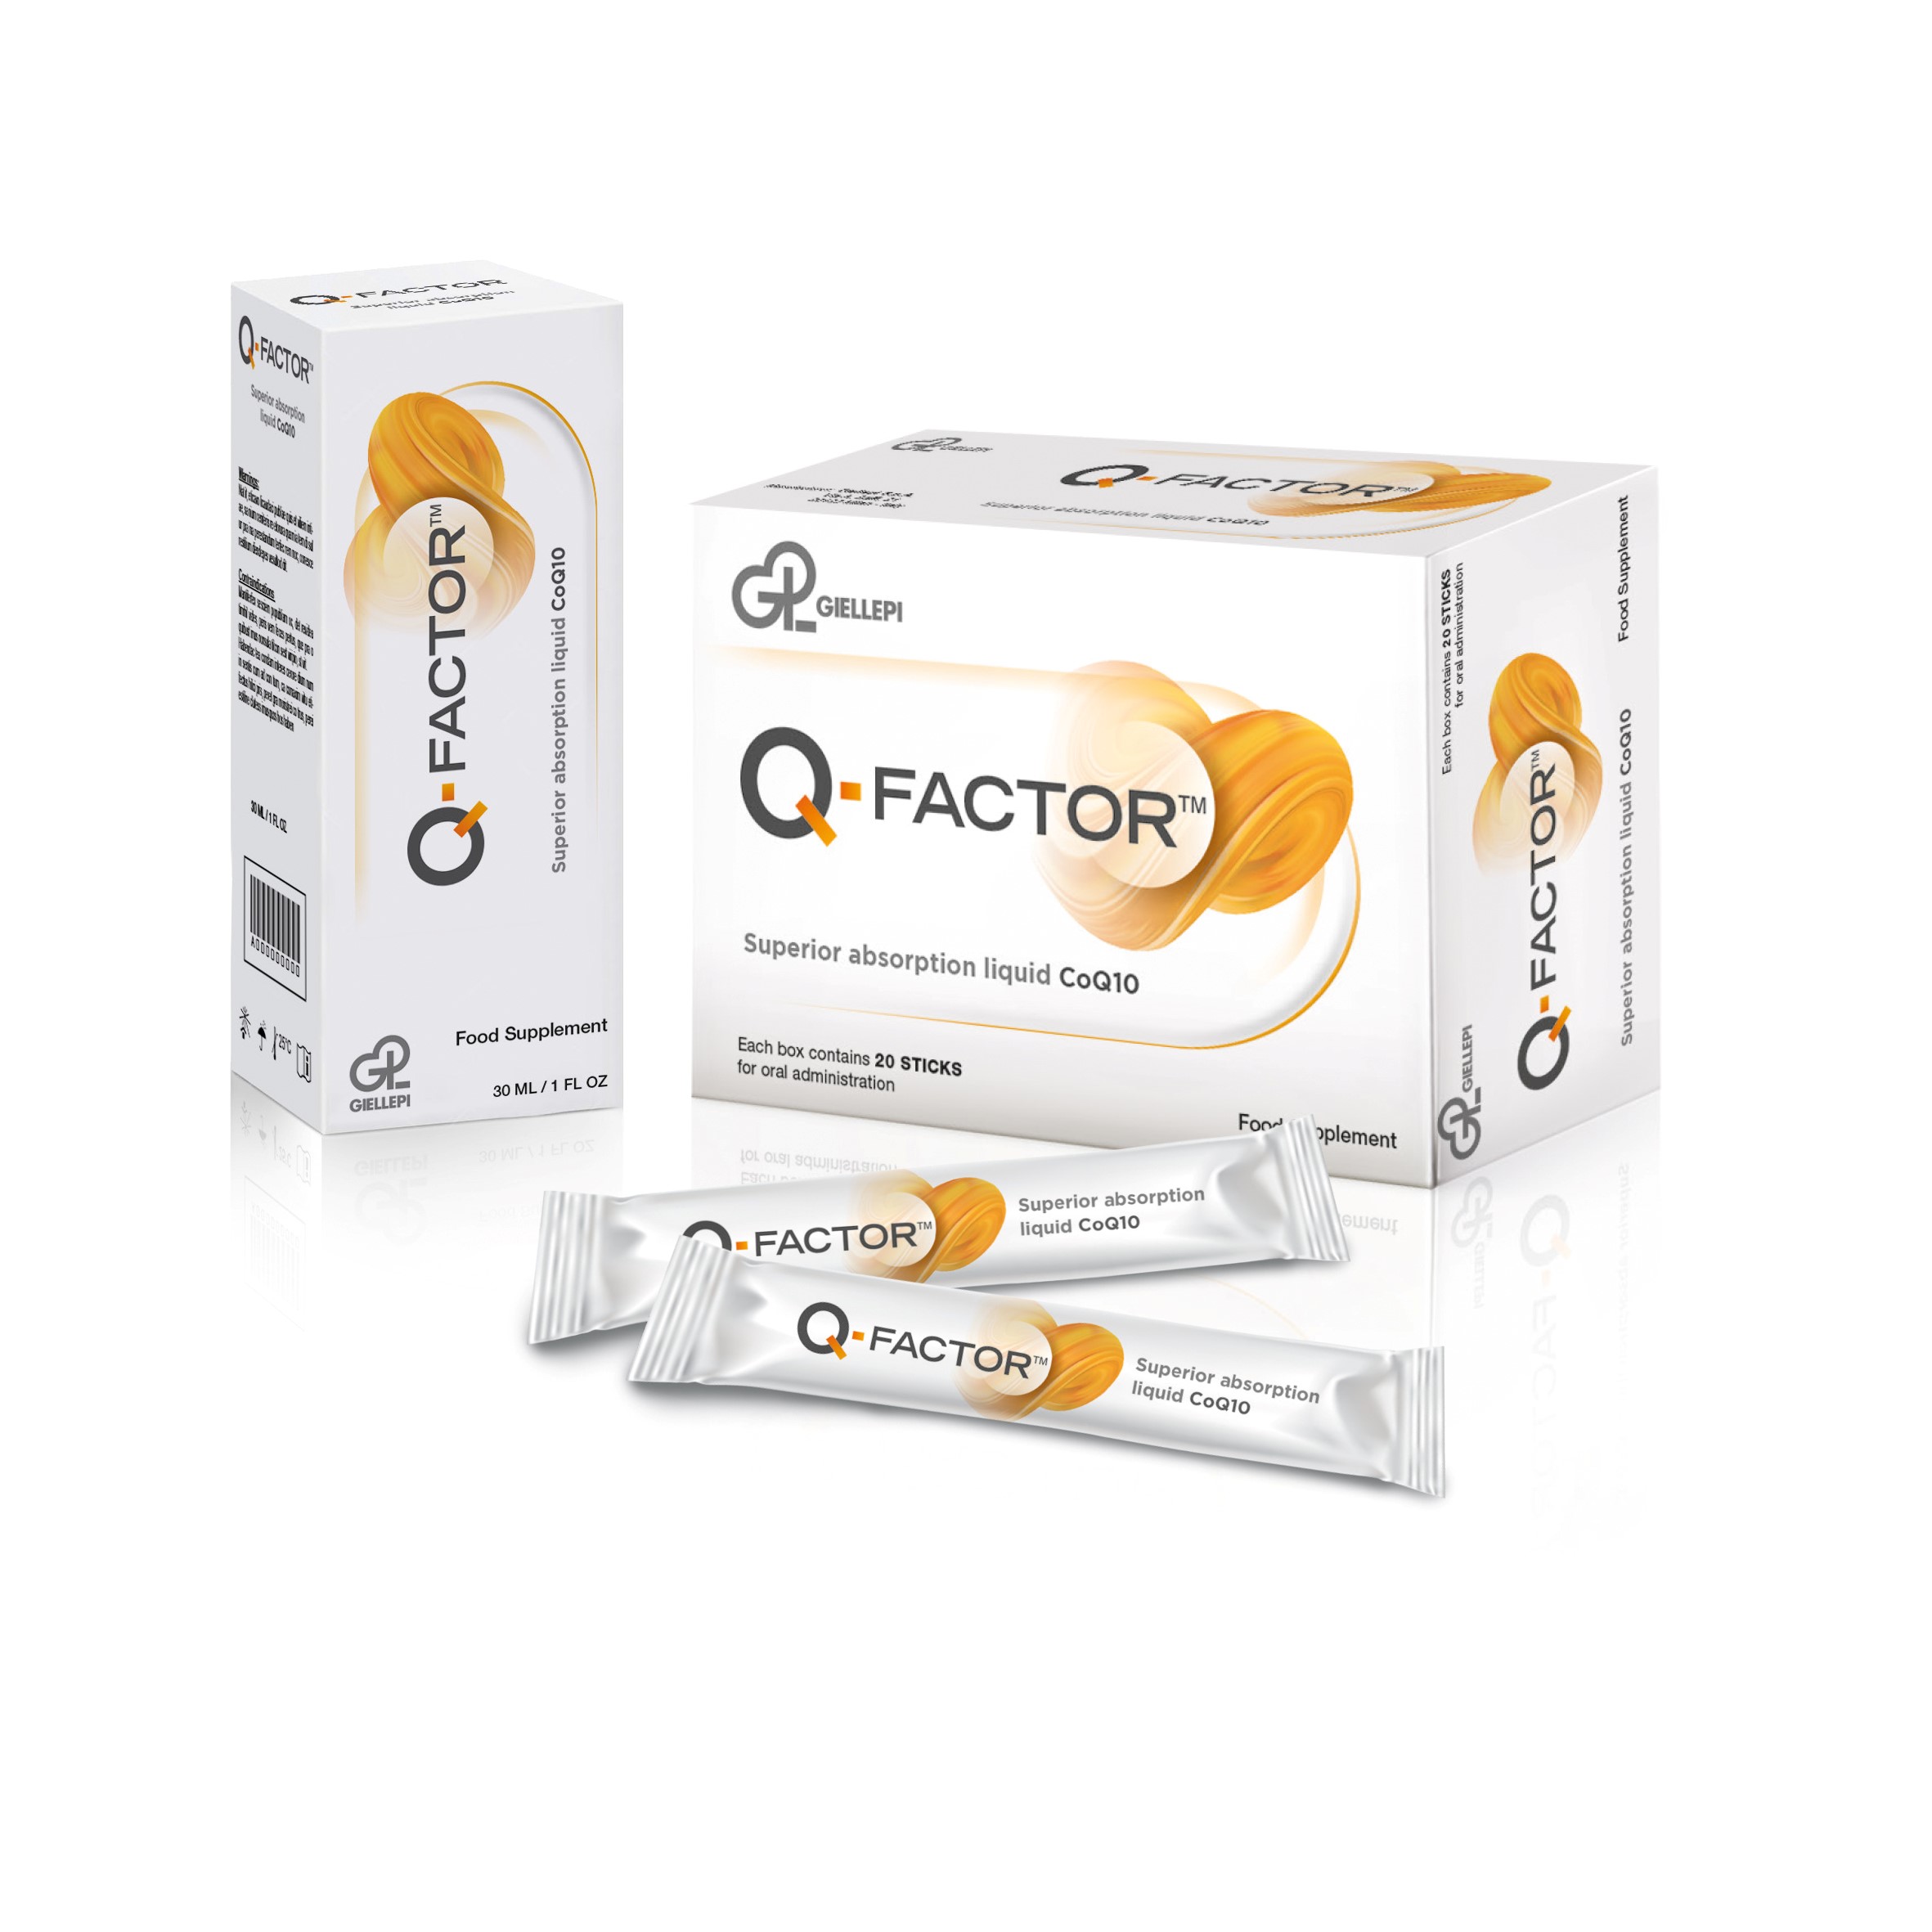 Giellepi presents research on Q-FACTOR dietary supplement 